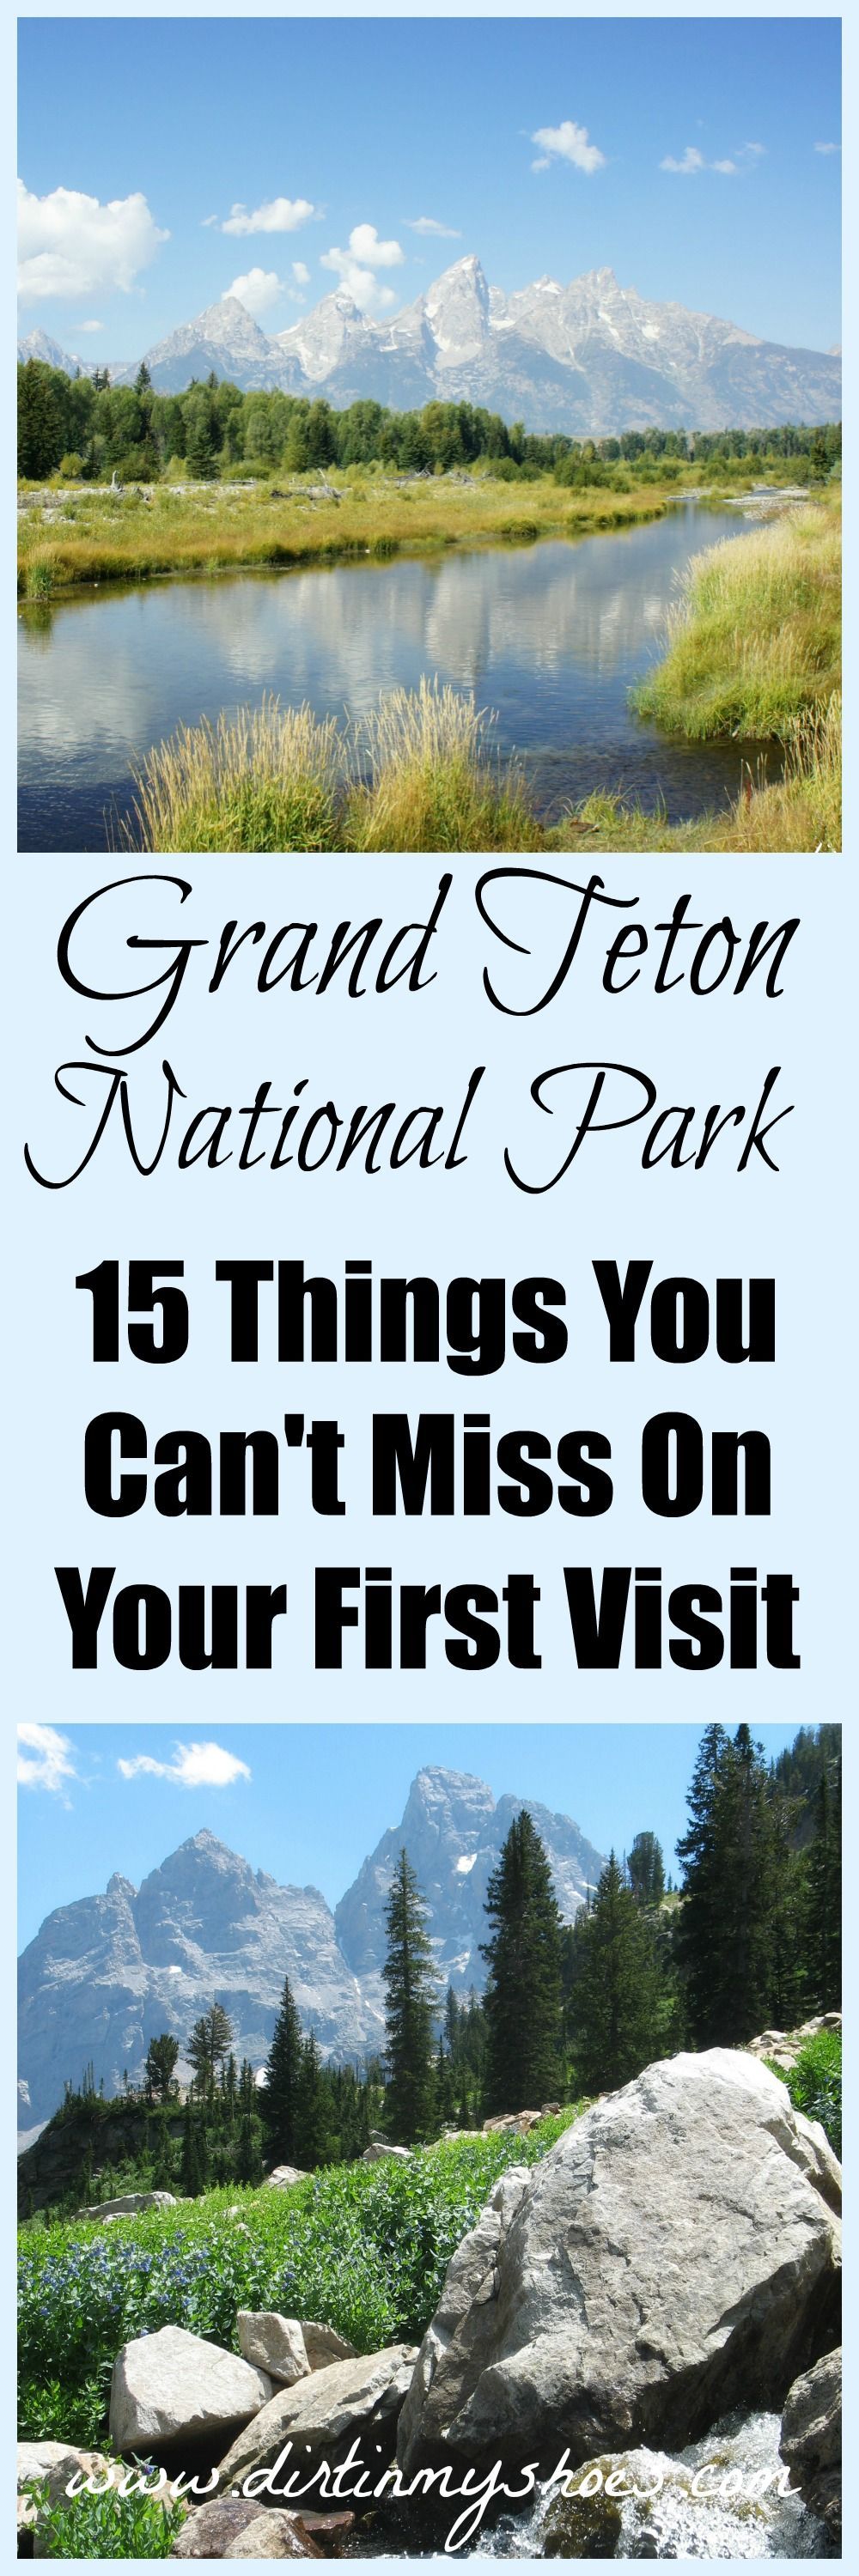 Grand Teton National Park – 15 Hikes and other incredible activity ideas from a former park ranger | Dirt